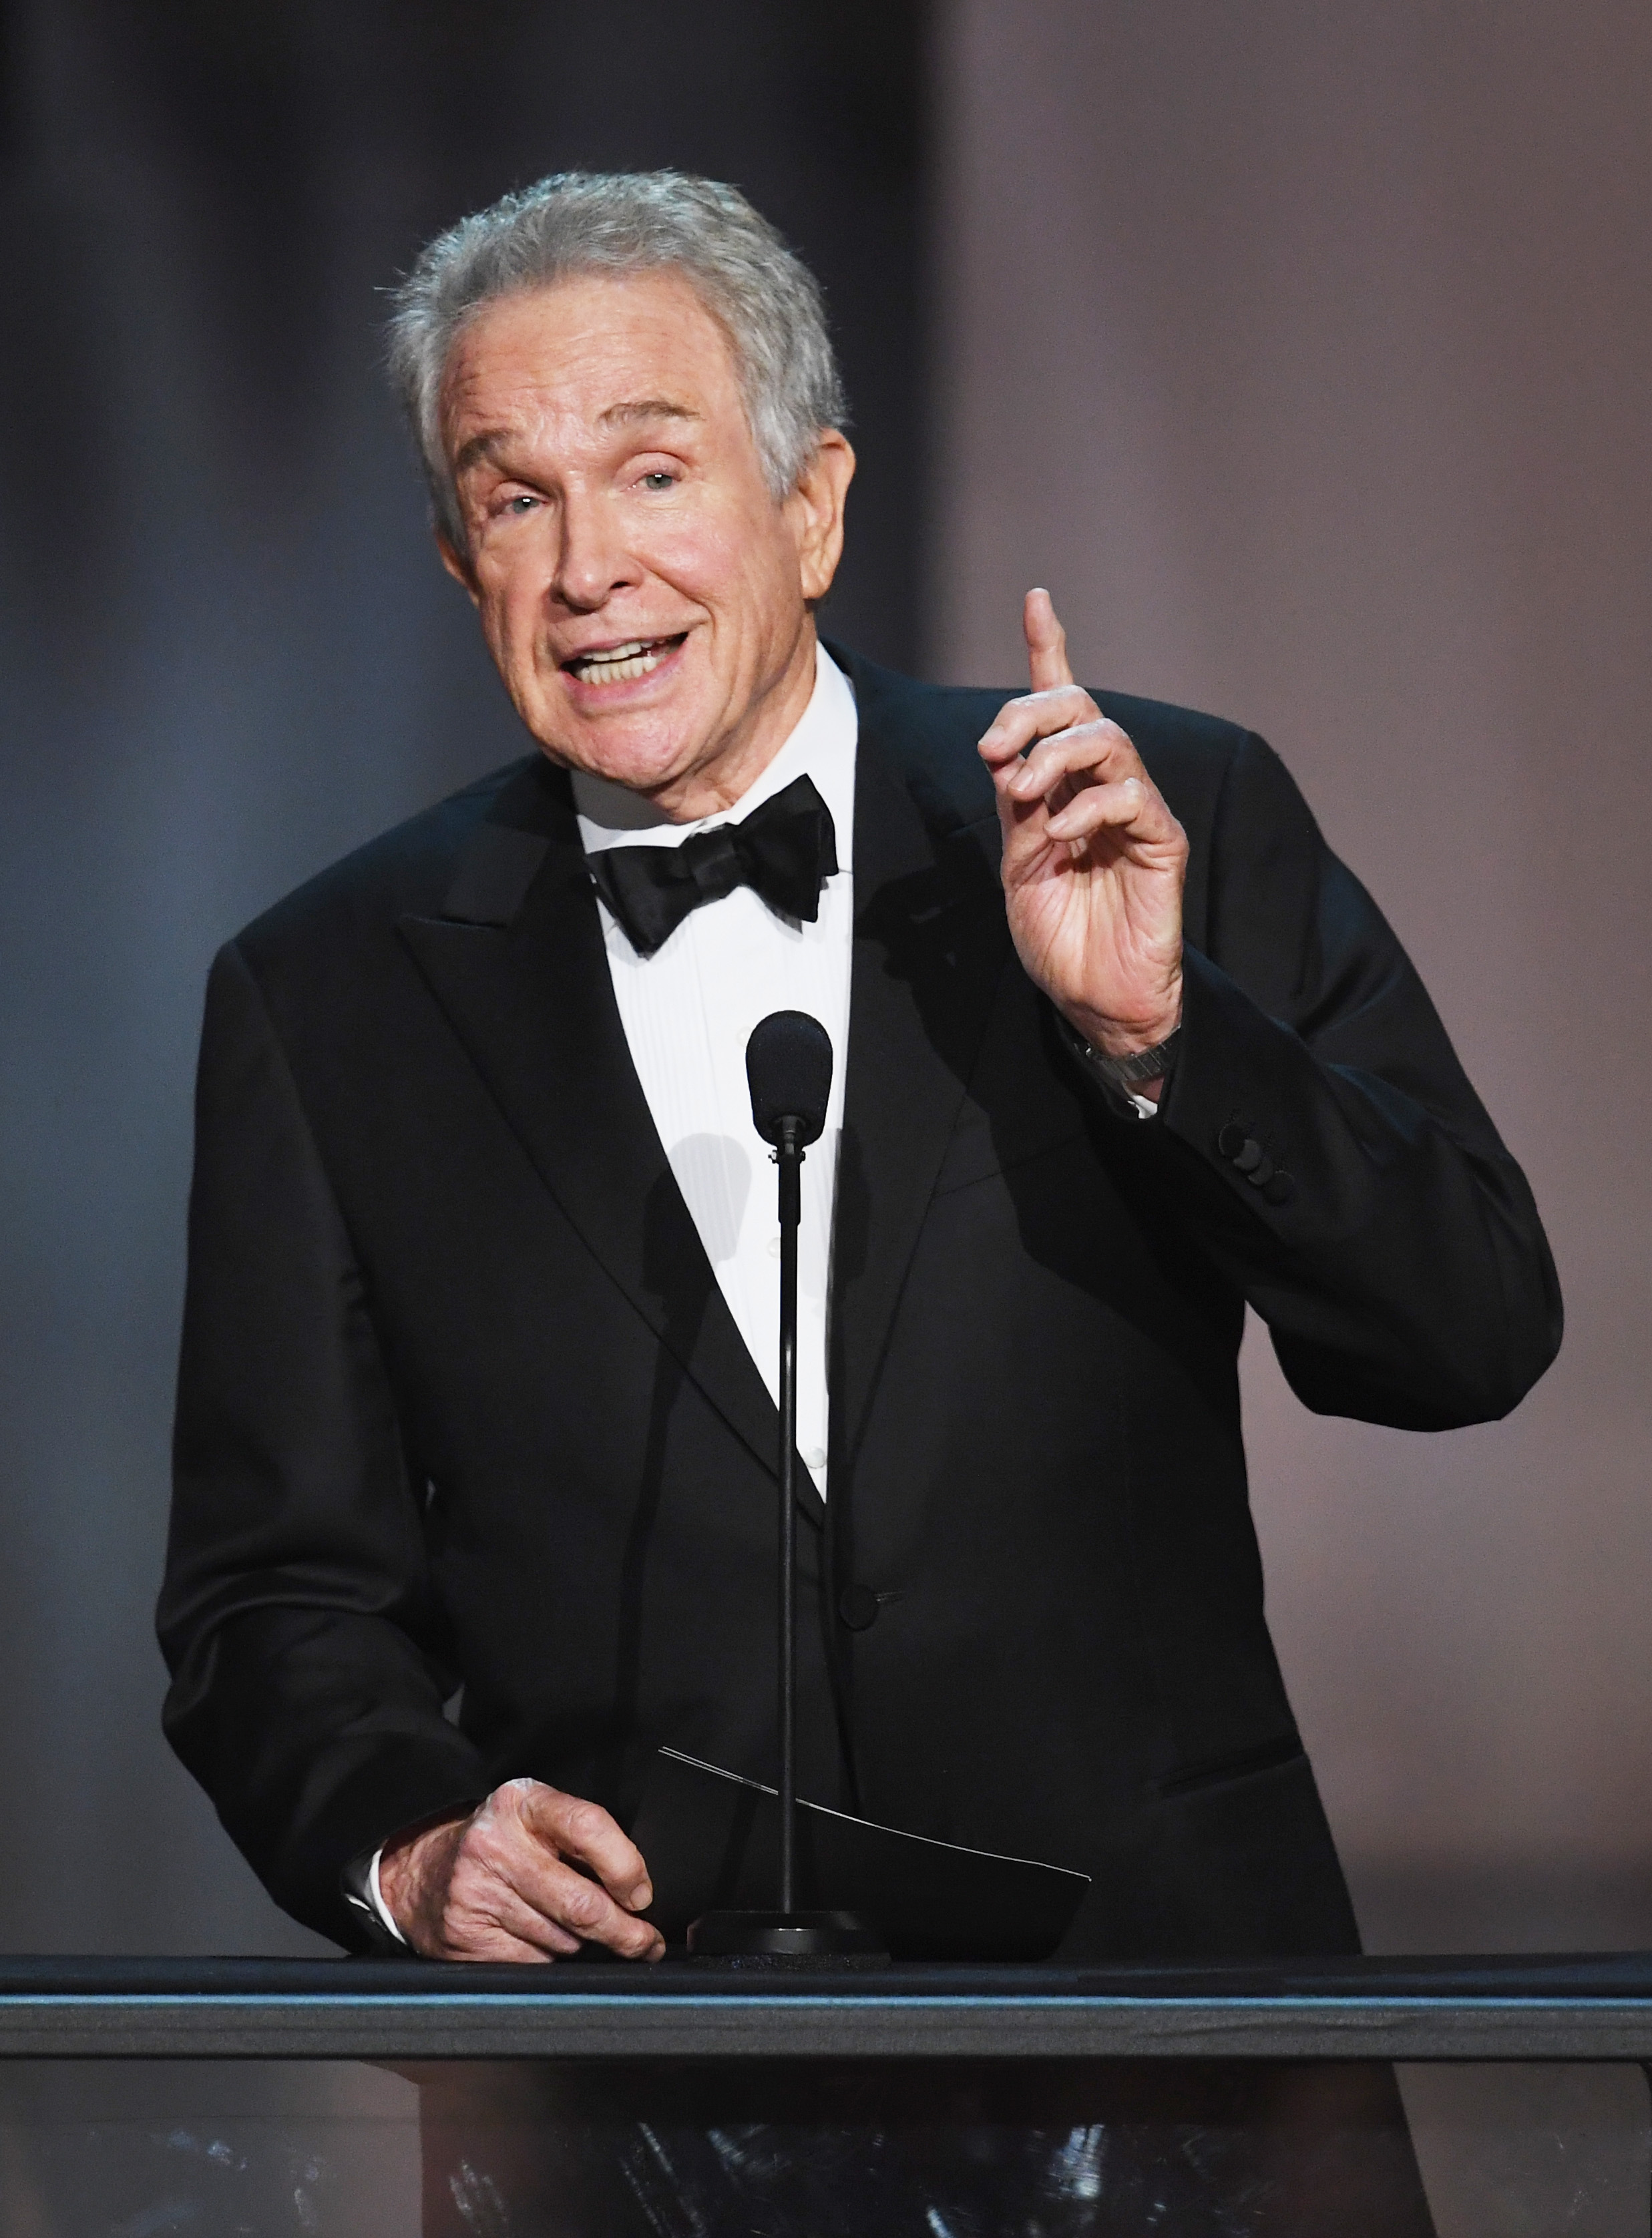 Warren Beatty onstage during the 90th Annual Academy Awards at the Dolby Theatre at Hollywood & Highland Center on March 4, 2018. | Photo: Getty Images